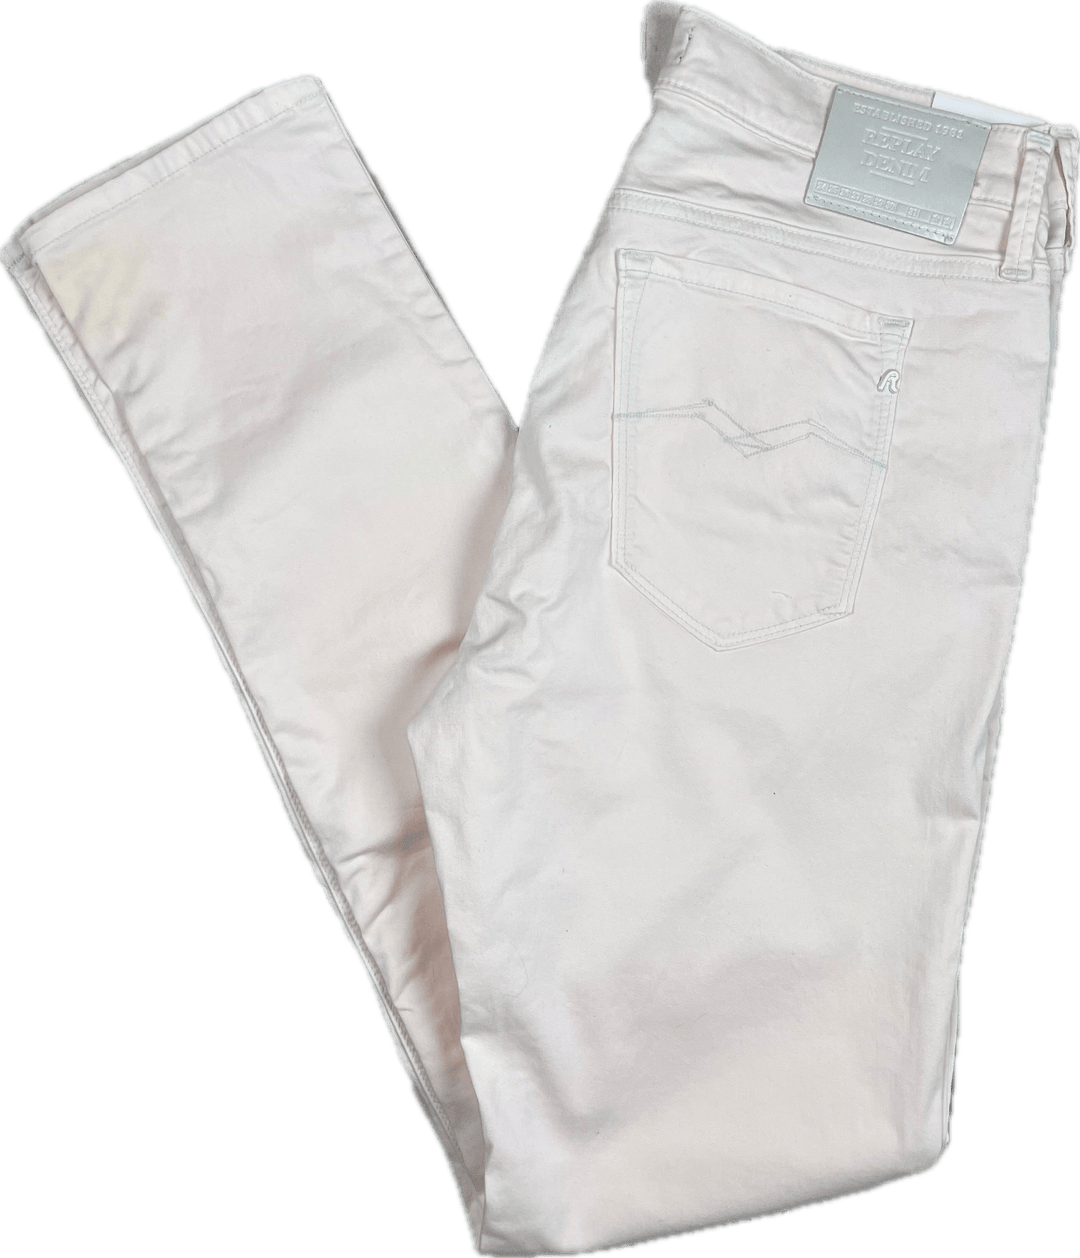 NWT - Replay Italy 'J01' Lightweight Pink Denim Jeans RRP $249.00- Size 30 - Jean Pool